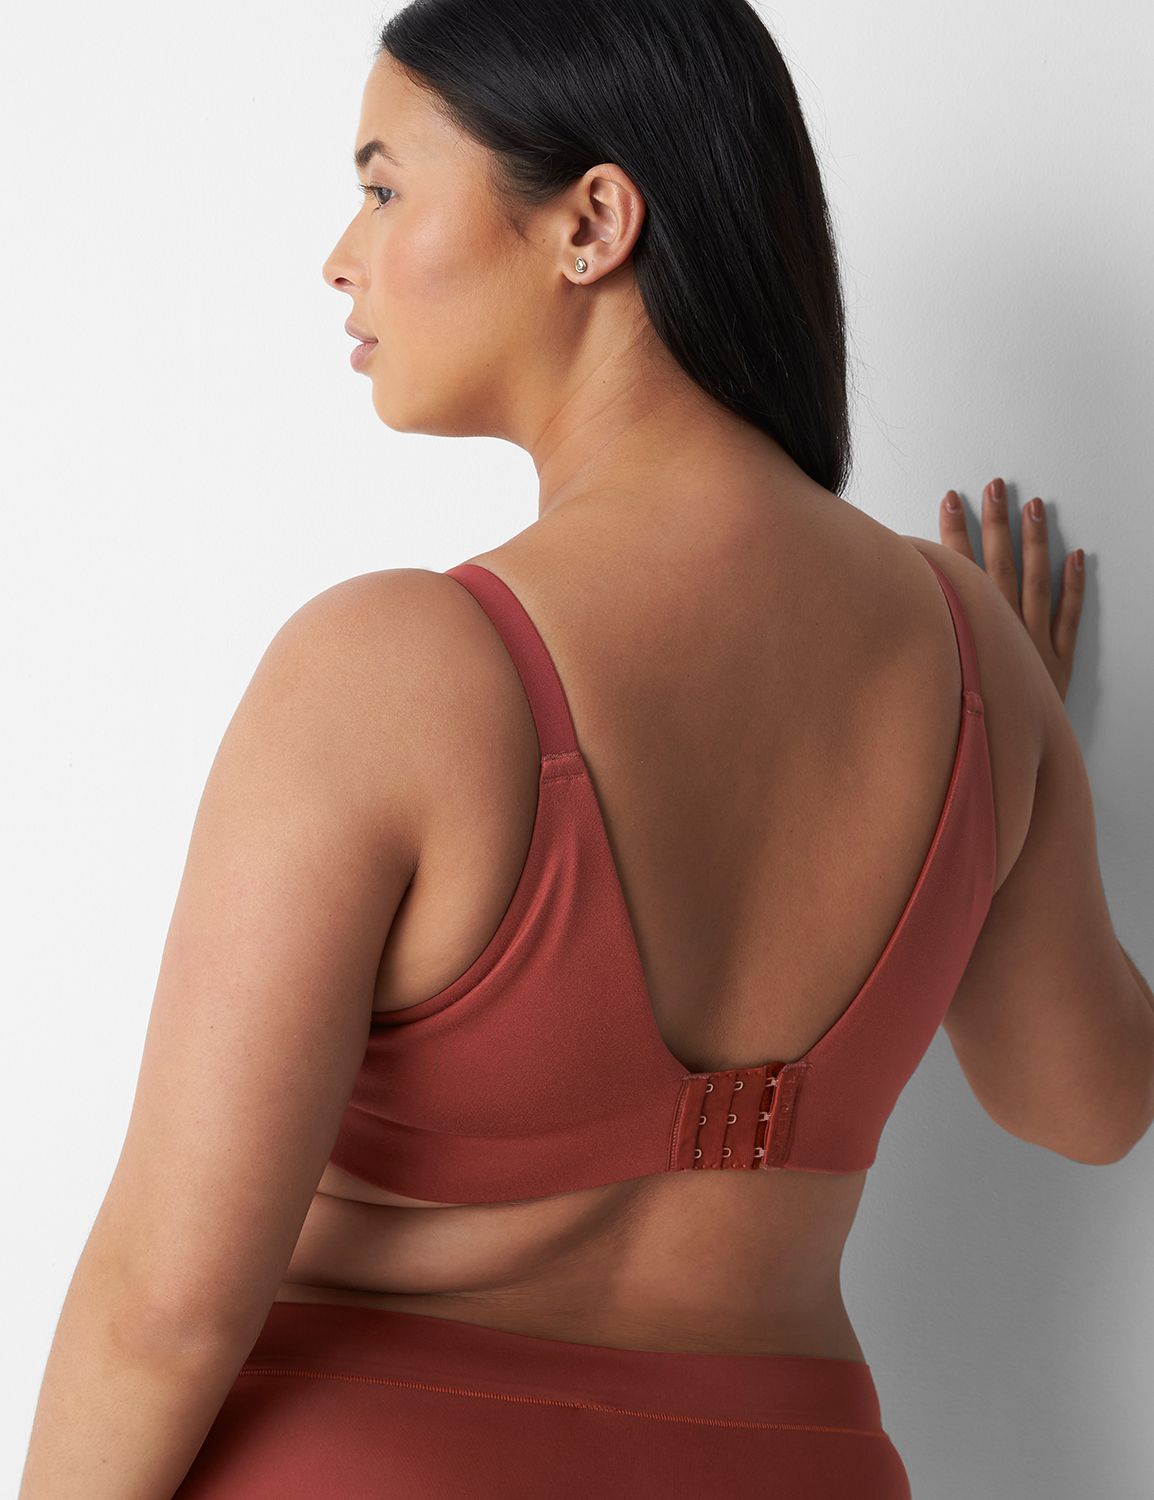 Would You Try This New Back Smoothing Bra?